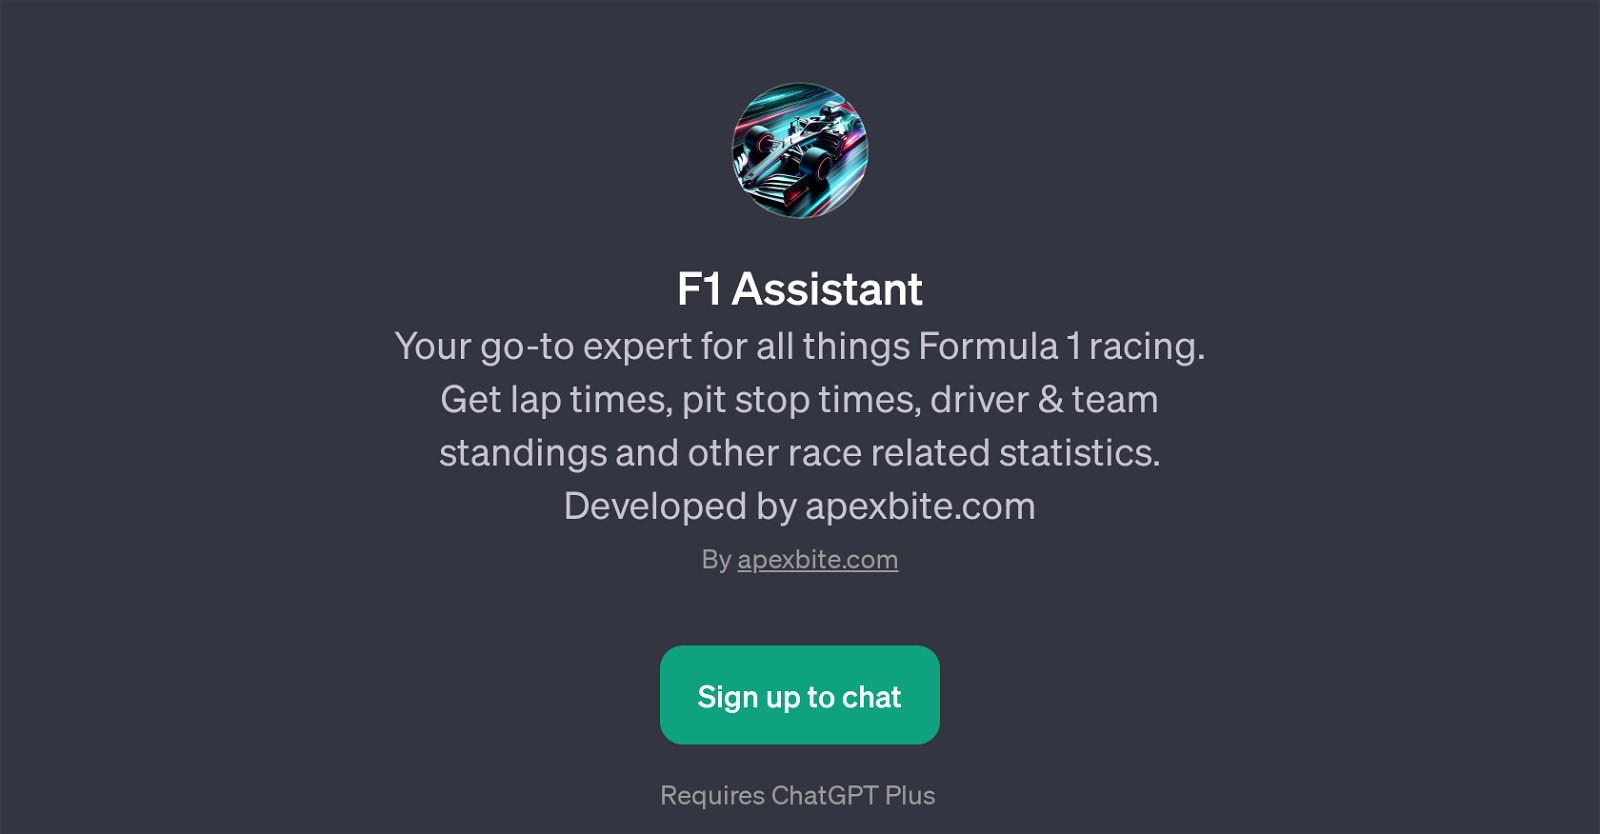 F1 Assistant website